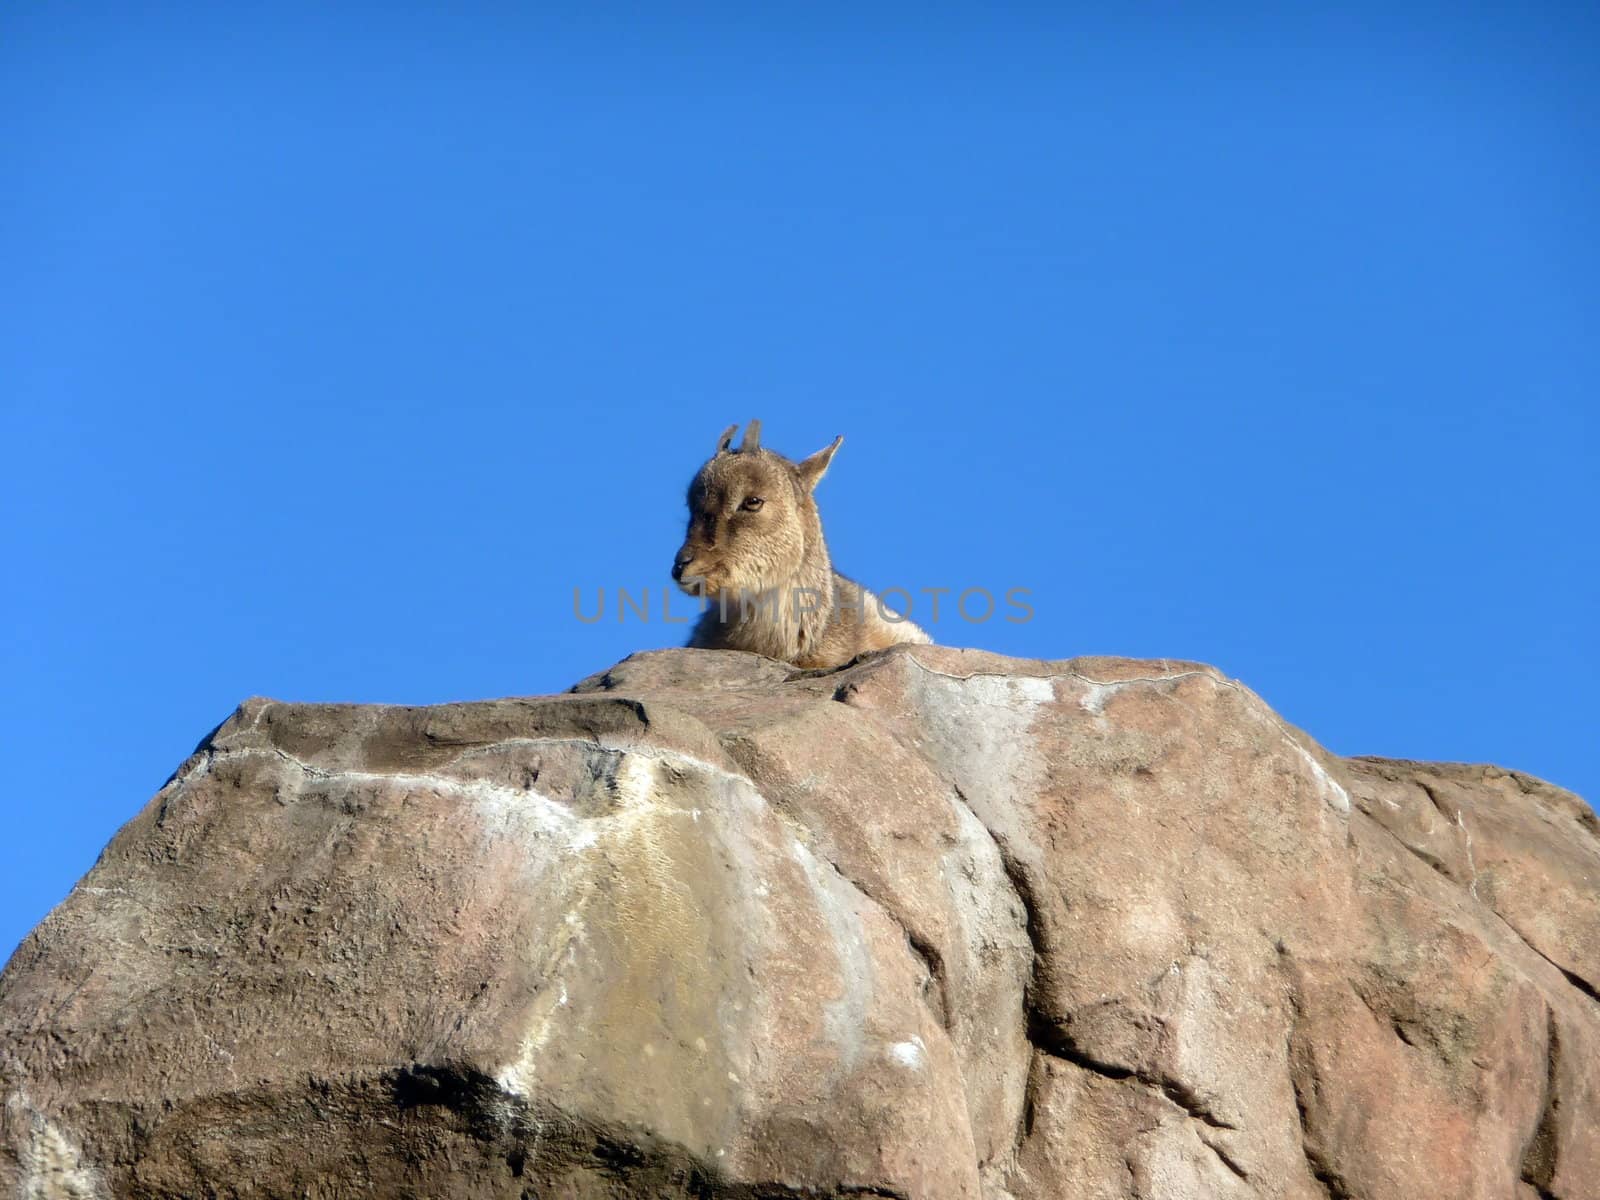 Goat on rock by tomatto